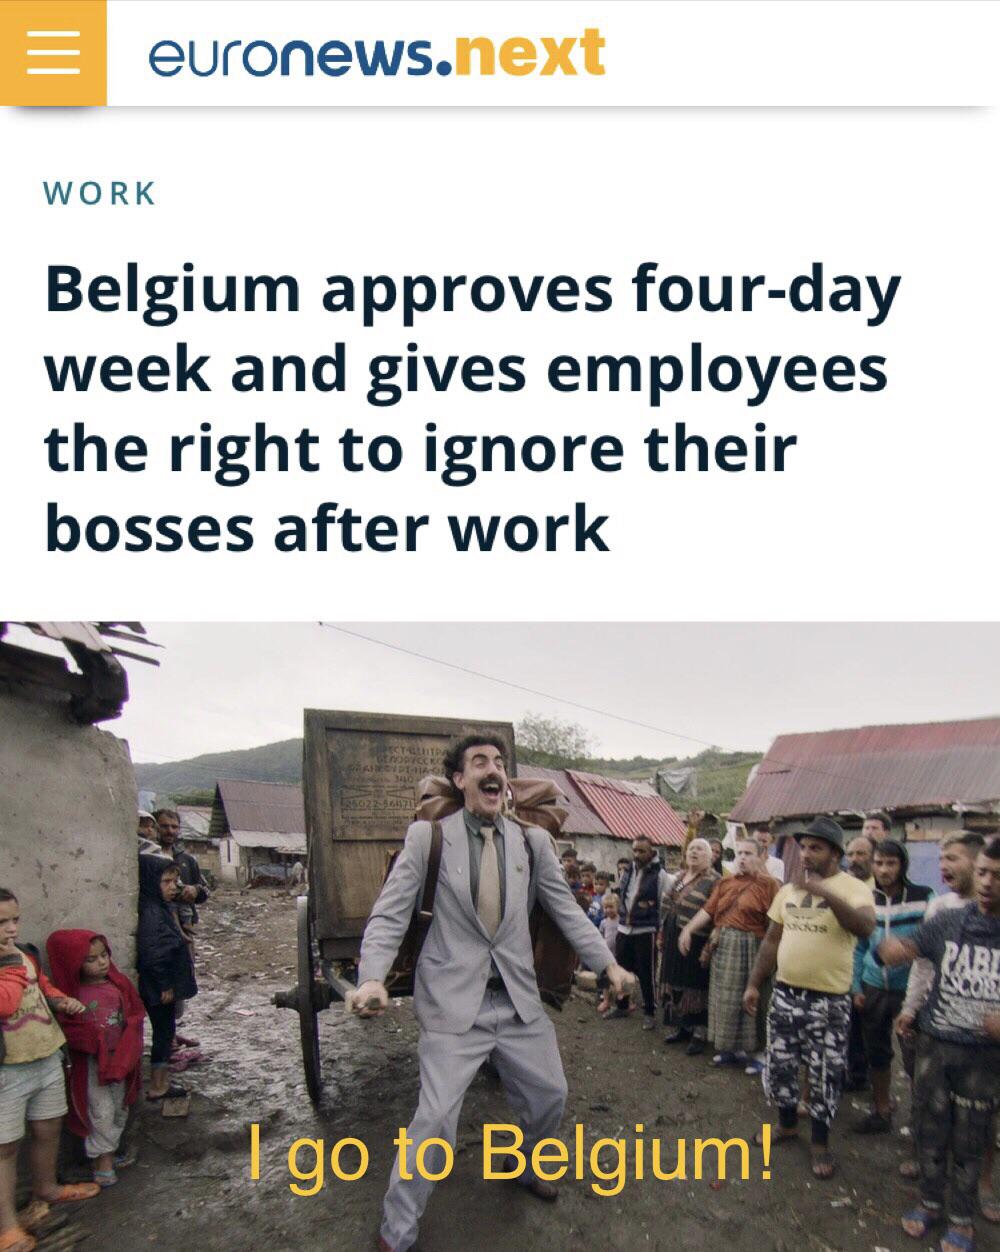 dank memes - funny memes - borat i go to america meme template - euronews.next Work Belgium approves fourday week and gives employees the right to ignore their bosses after work Orodice 0 5022 Rabe No go to Belgium!